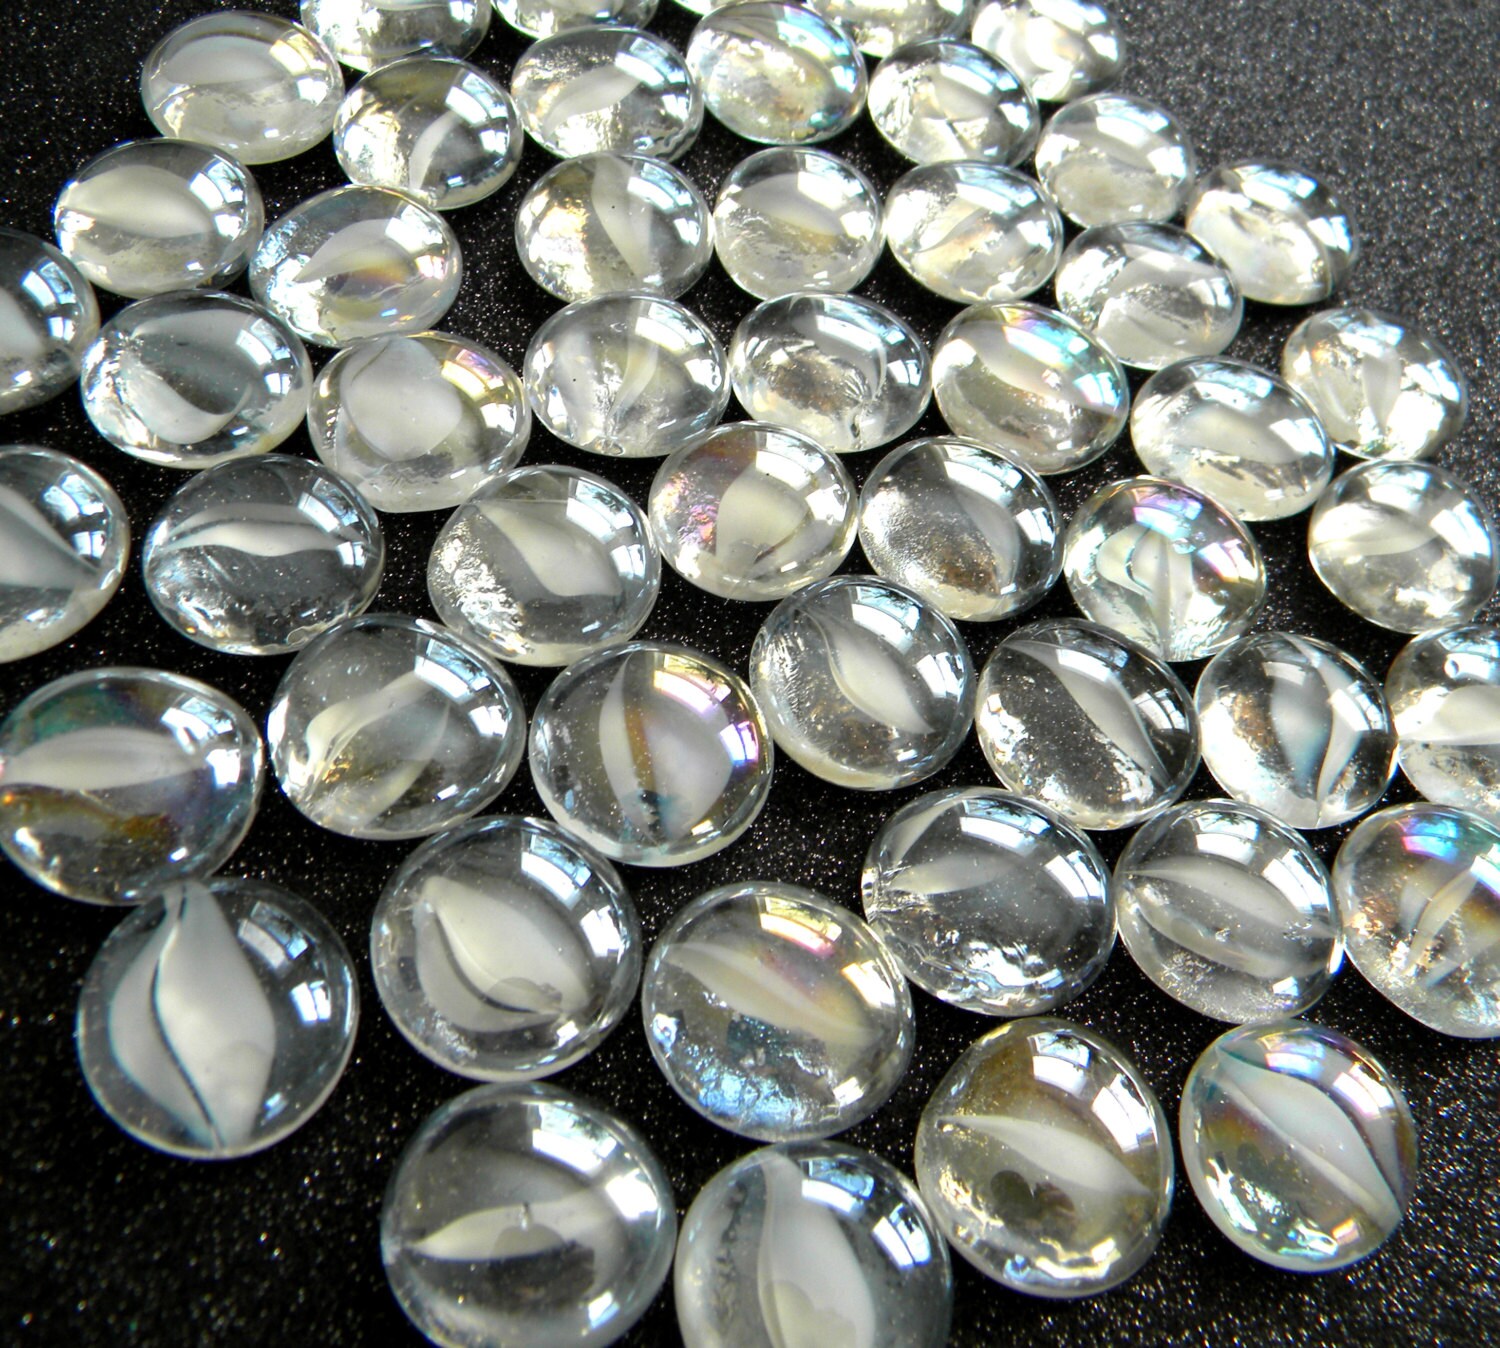 Functional flat clear glass marbles For Adorning Spaces 